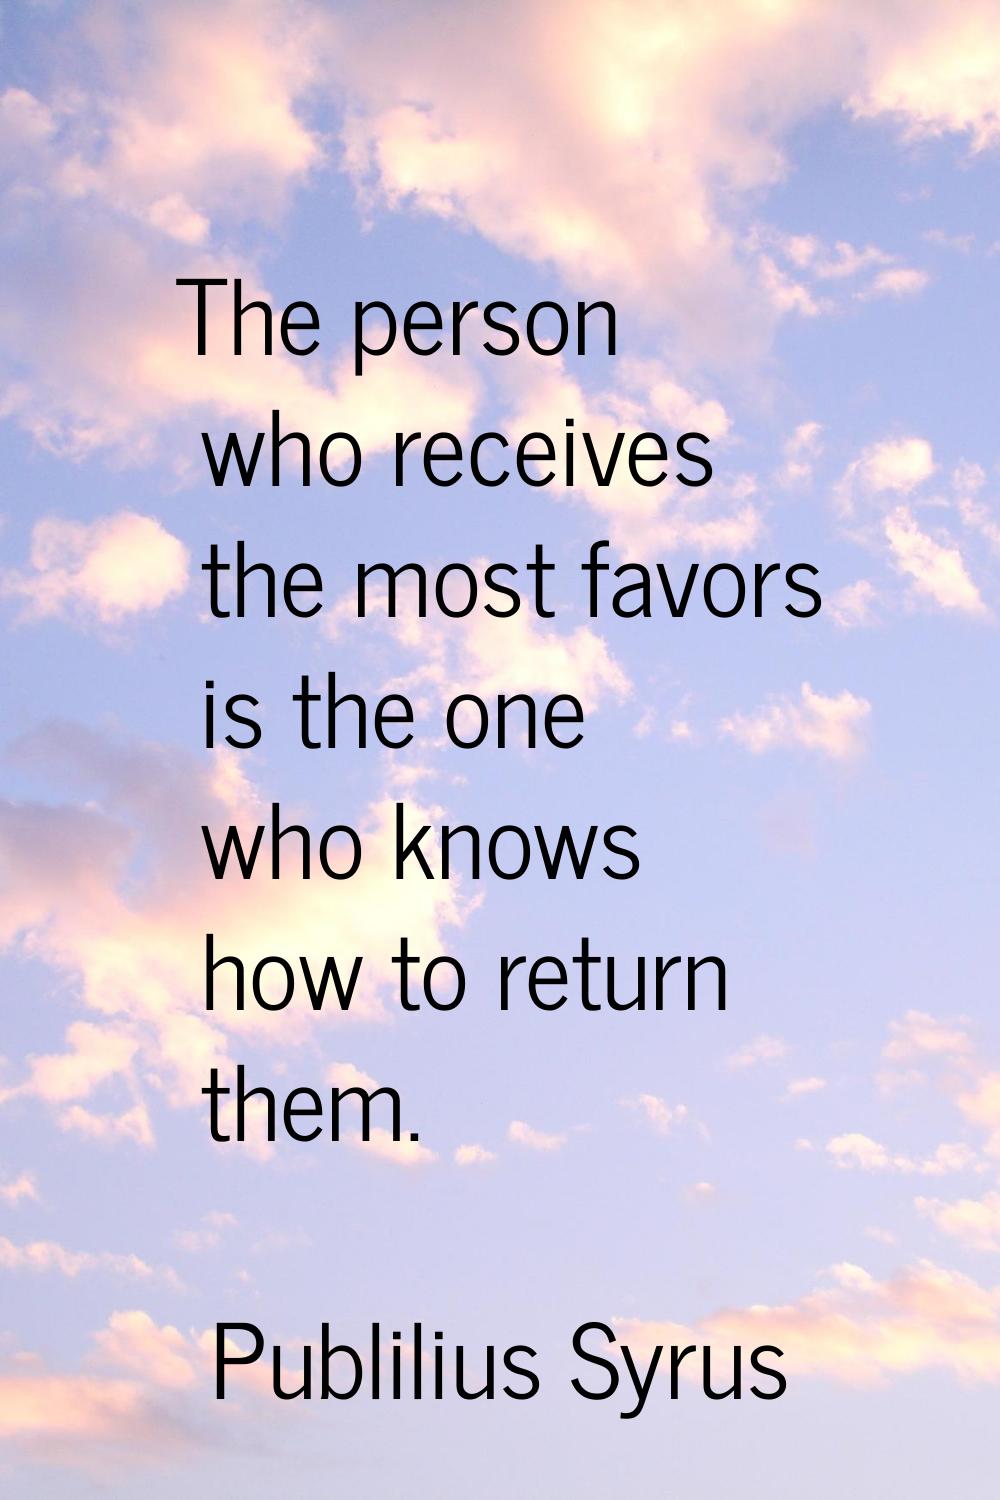 The person who receives the most favors is the one who knows how to return them.